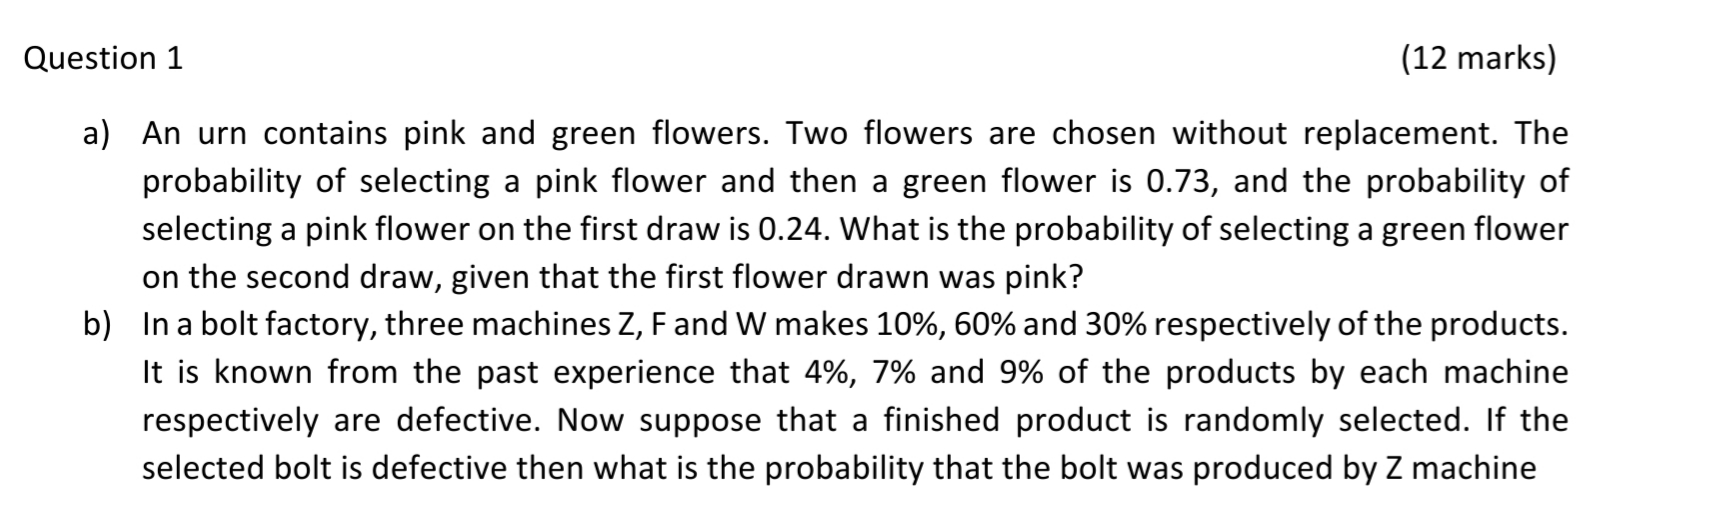 ) An urn contains pink and green flowers. Two flowers are chosen without replacement. The
probability of selecting a pink flower and then a green flower is 0.73, and the probability of
selecting a pink flower on the first draw is 0.24. What is the probability of selecting a green flower
on the second draw, given that the first flower drawn was pink?
) In a bolt factory, three machines Z, Fand W makes 10%, 60% and 30% respectively of the products.
It is known from the past experience that 4%, 7% and 9% of the products by each machine
respectively are defective. Now suppose that a finished product is randomly selected. If the
selected bolt is defective then what is the probability that the bolt was produced by Z machine
